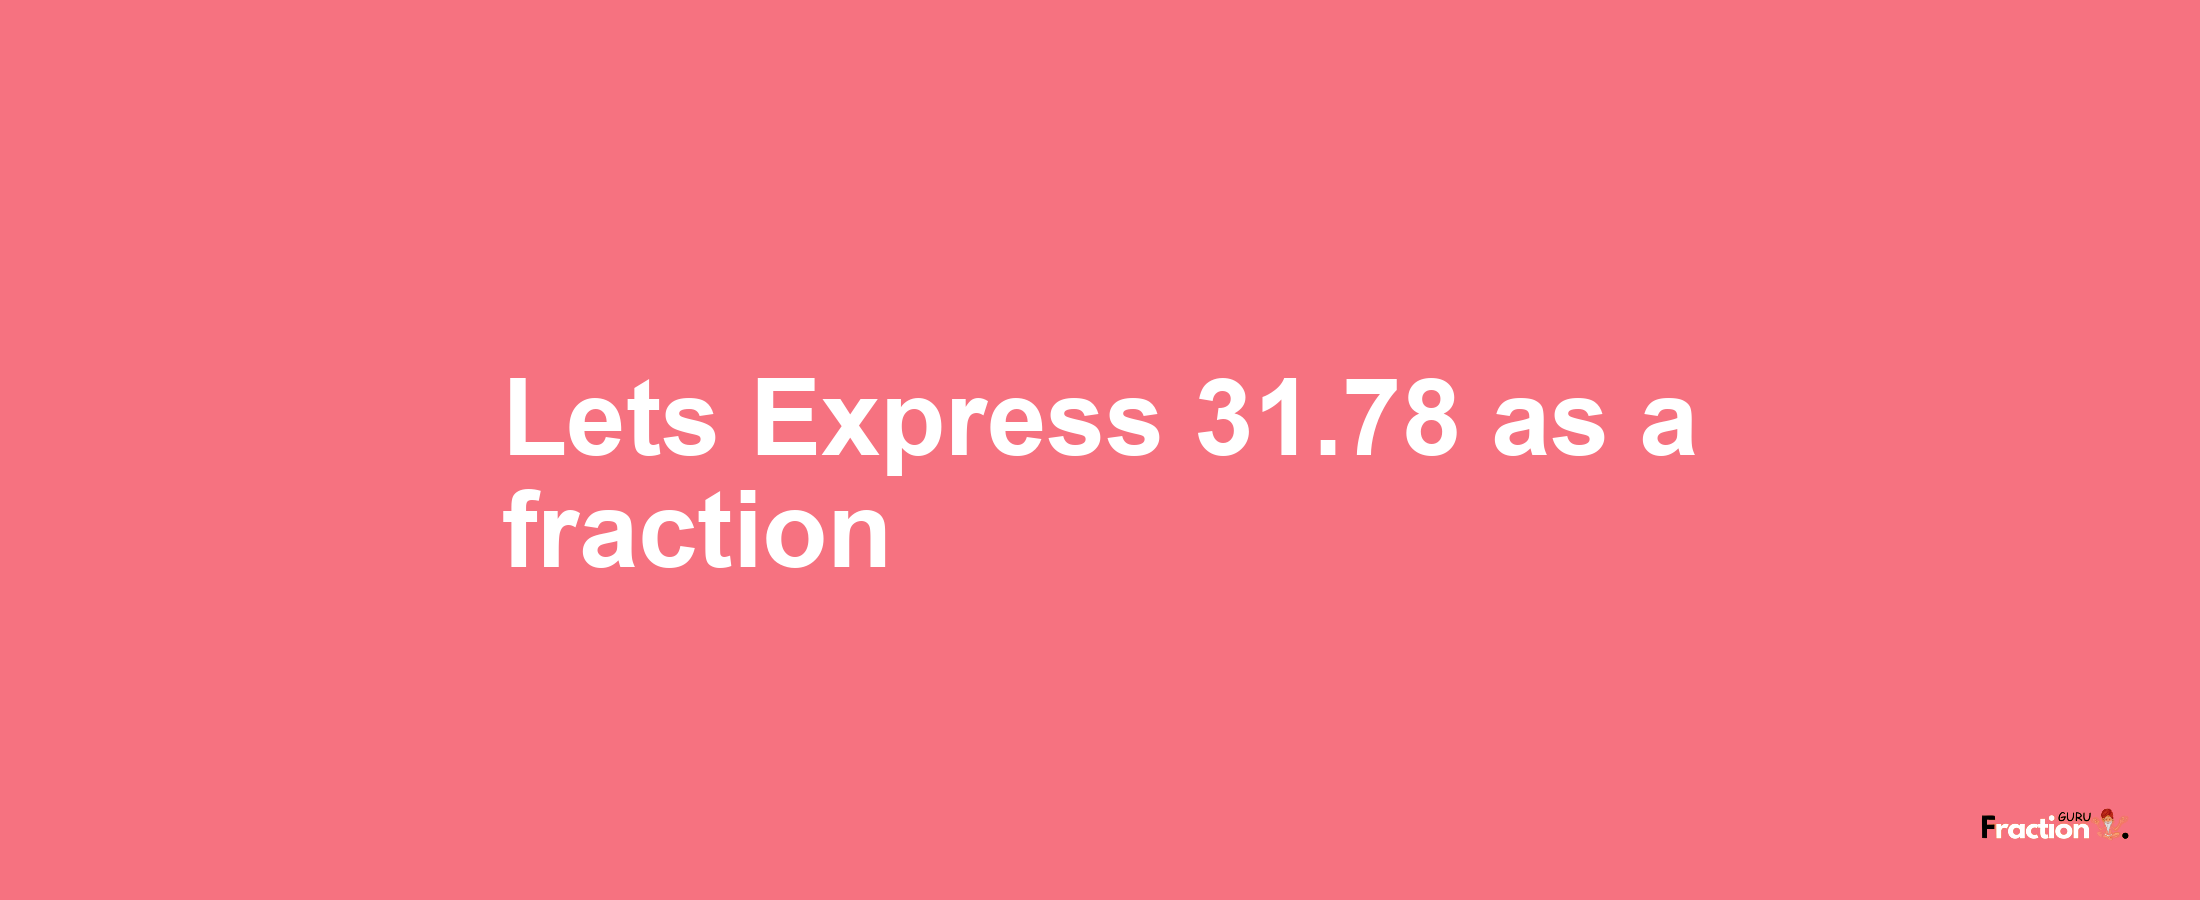 Lets Express 31.78 as afraction